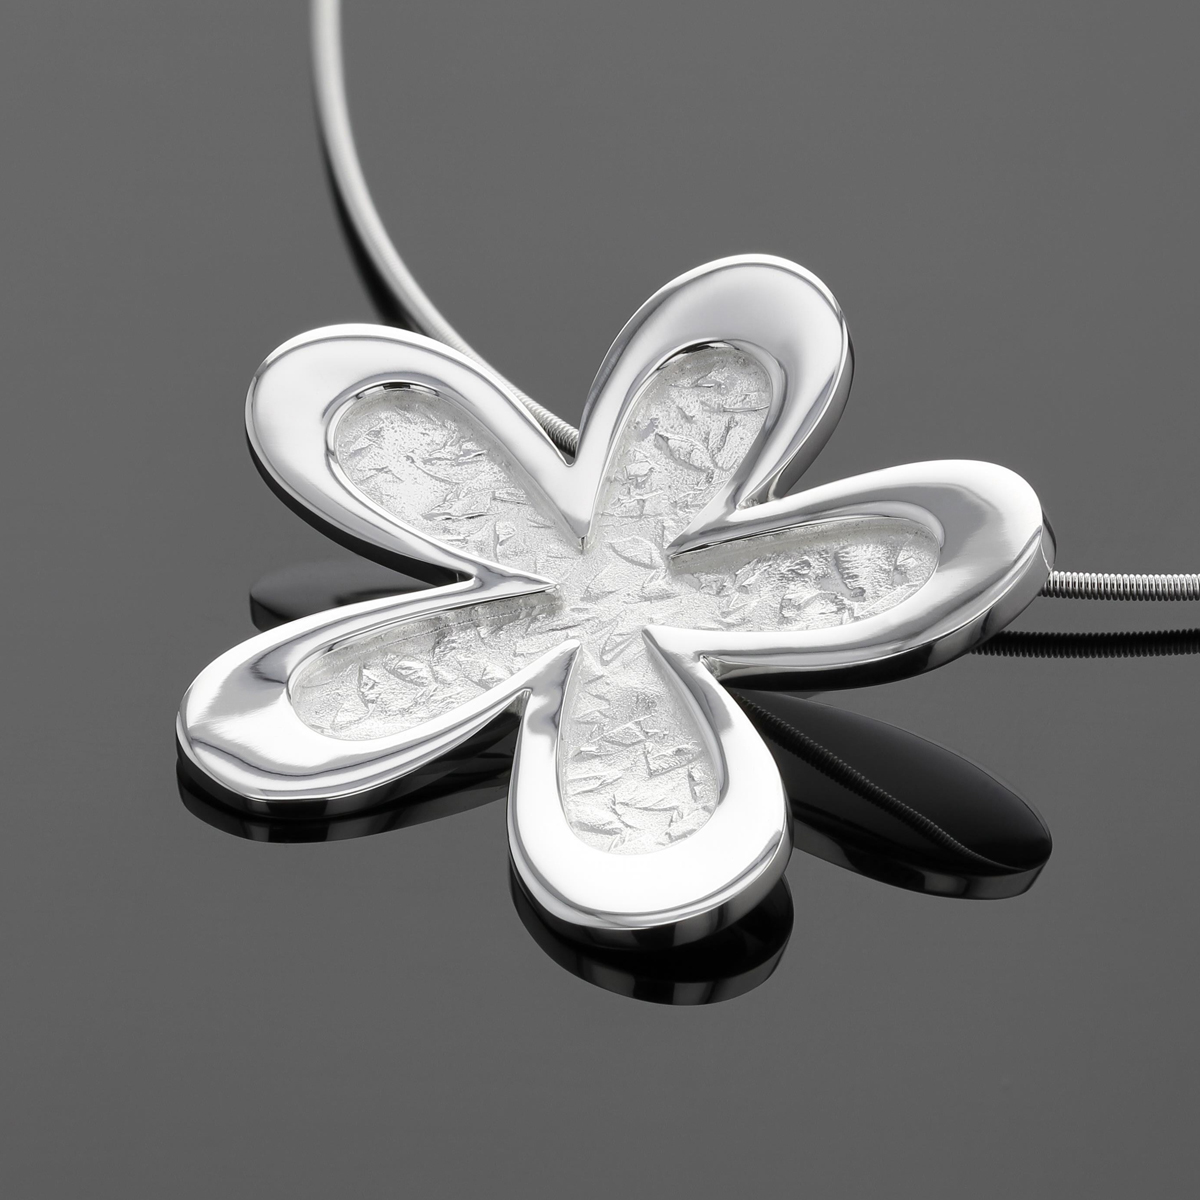 Silver floral designs made in Mauritius